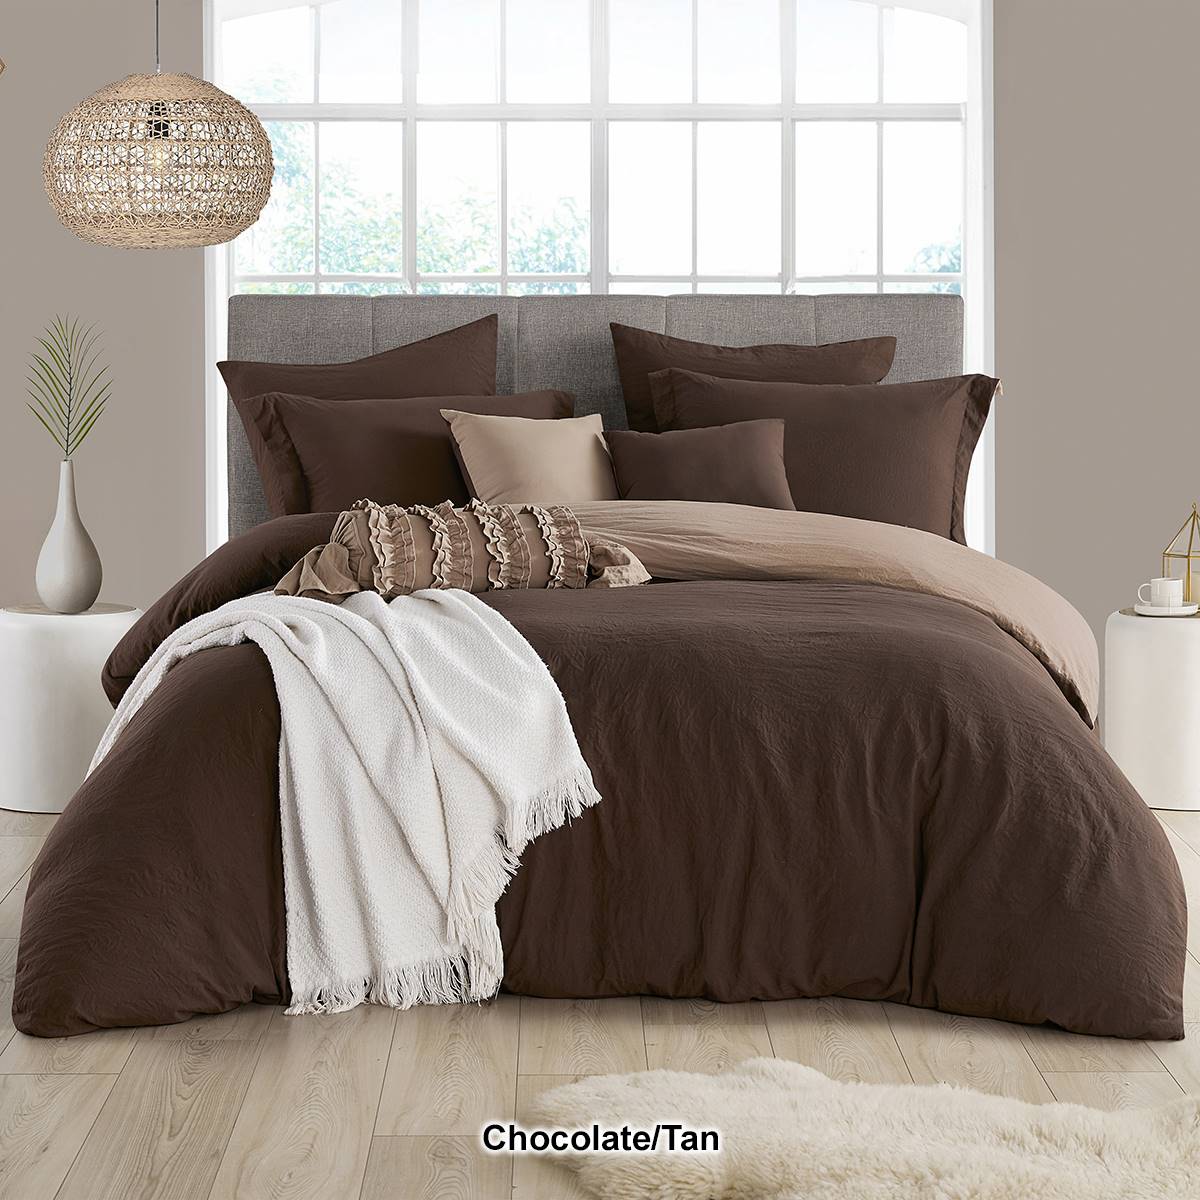 Cathay(R) Swift Home(R) Classic Microfiber Reversible Duvet Cover Set